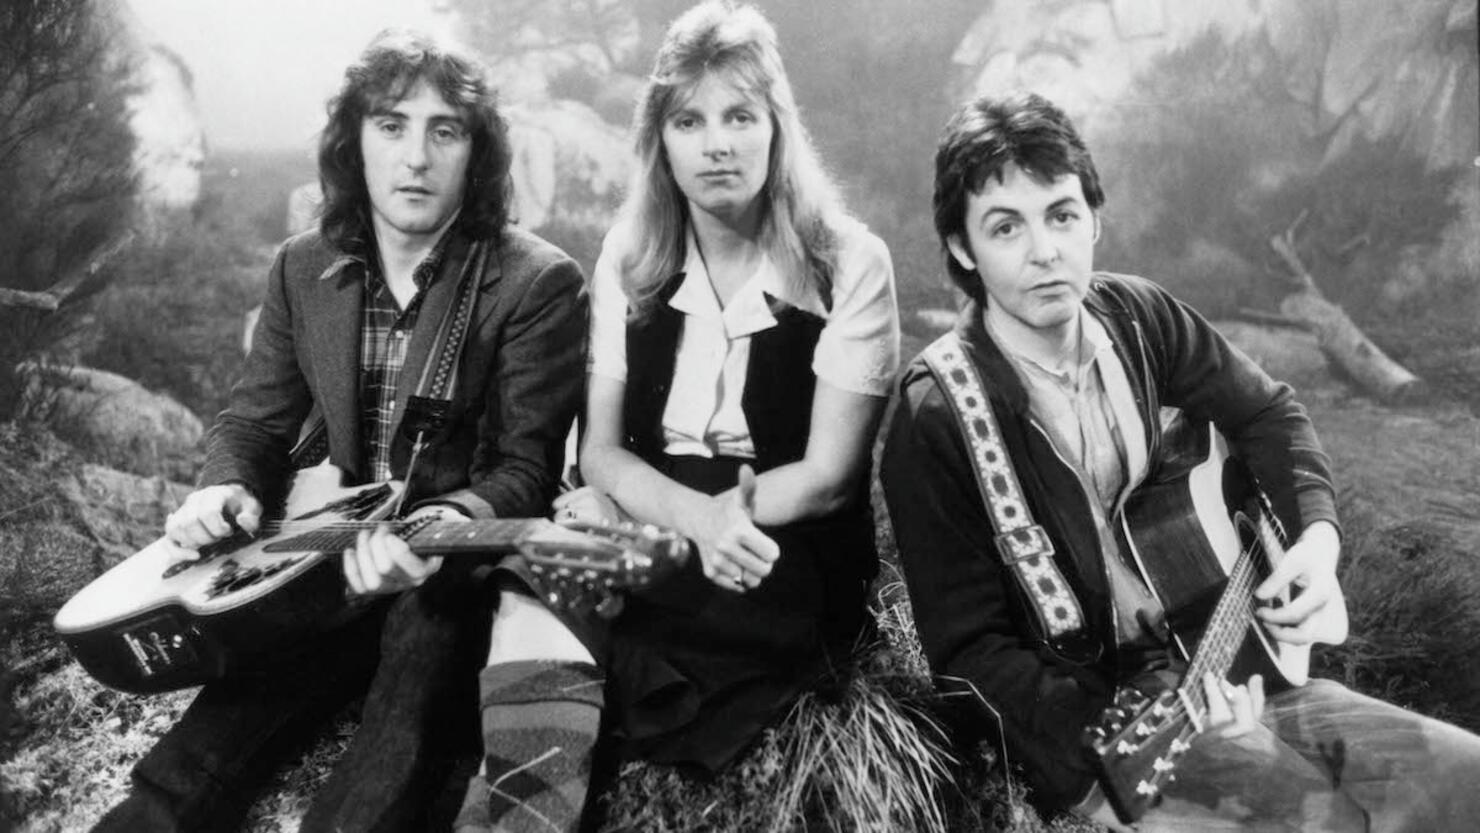 Photo of Denny LAINE and WINGS and Paul McCARTNEY and Linda McCARTNEY